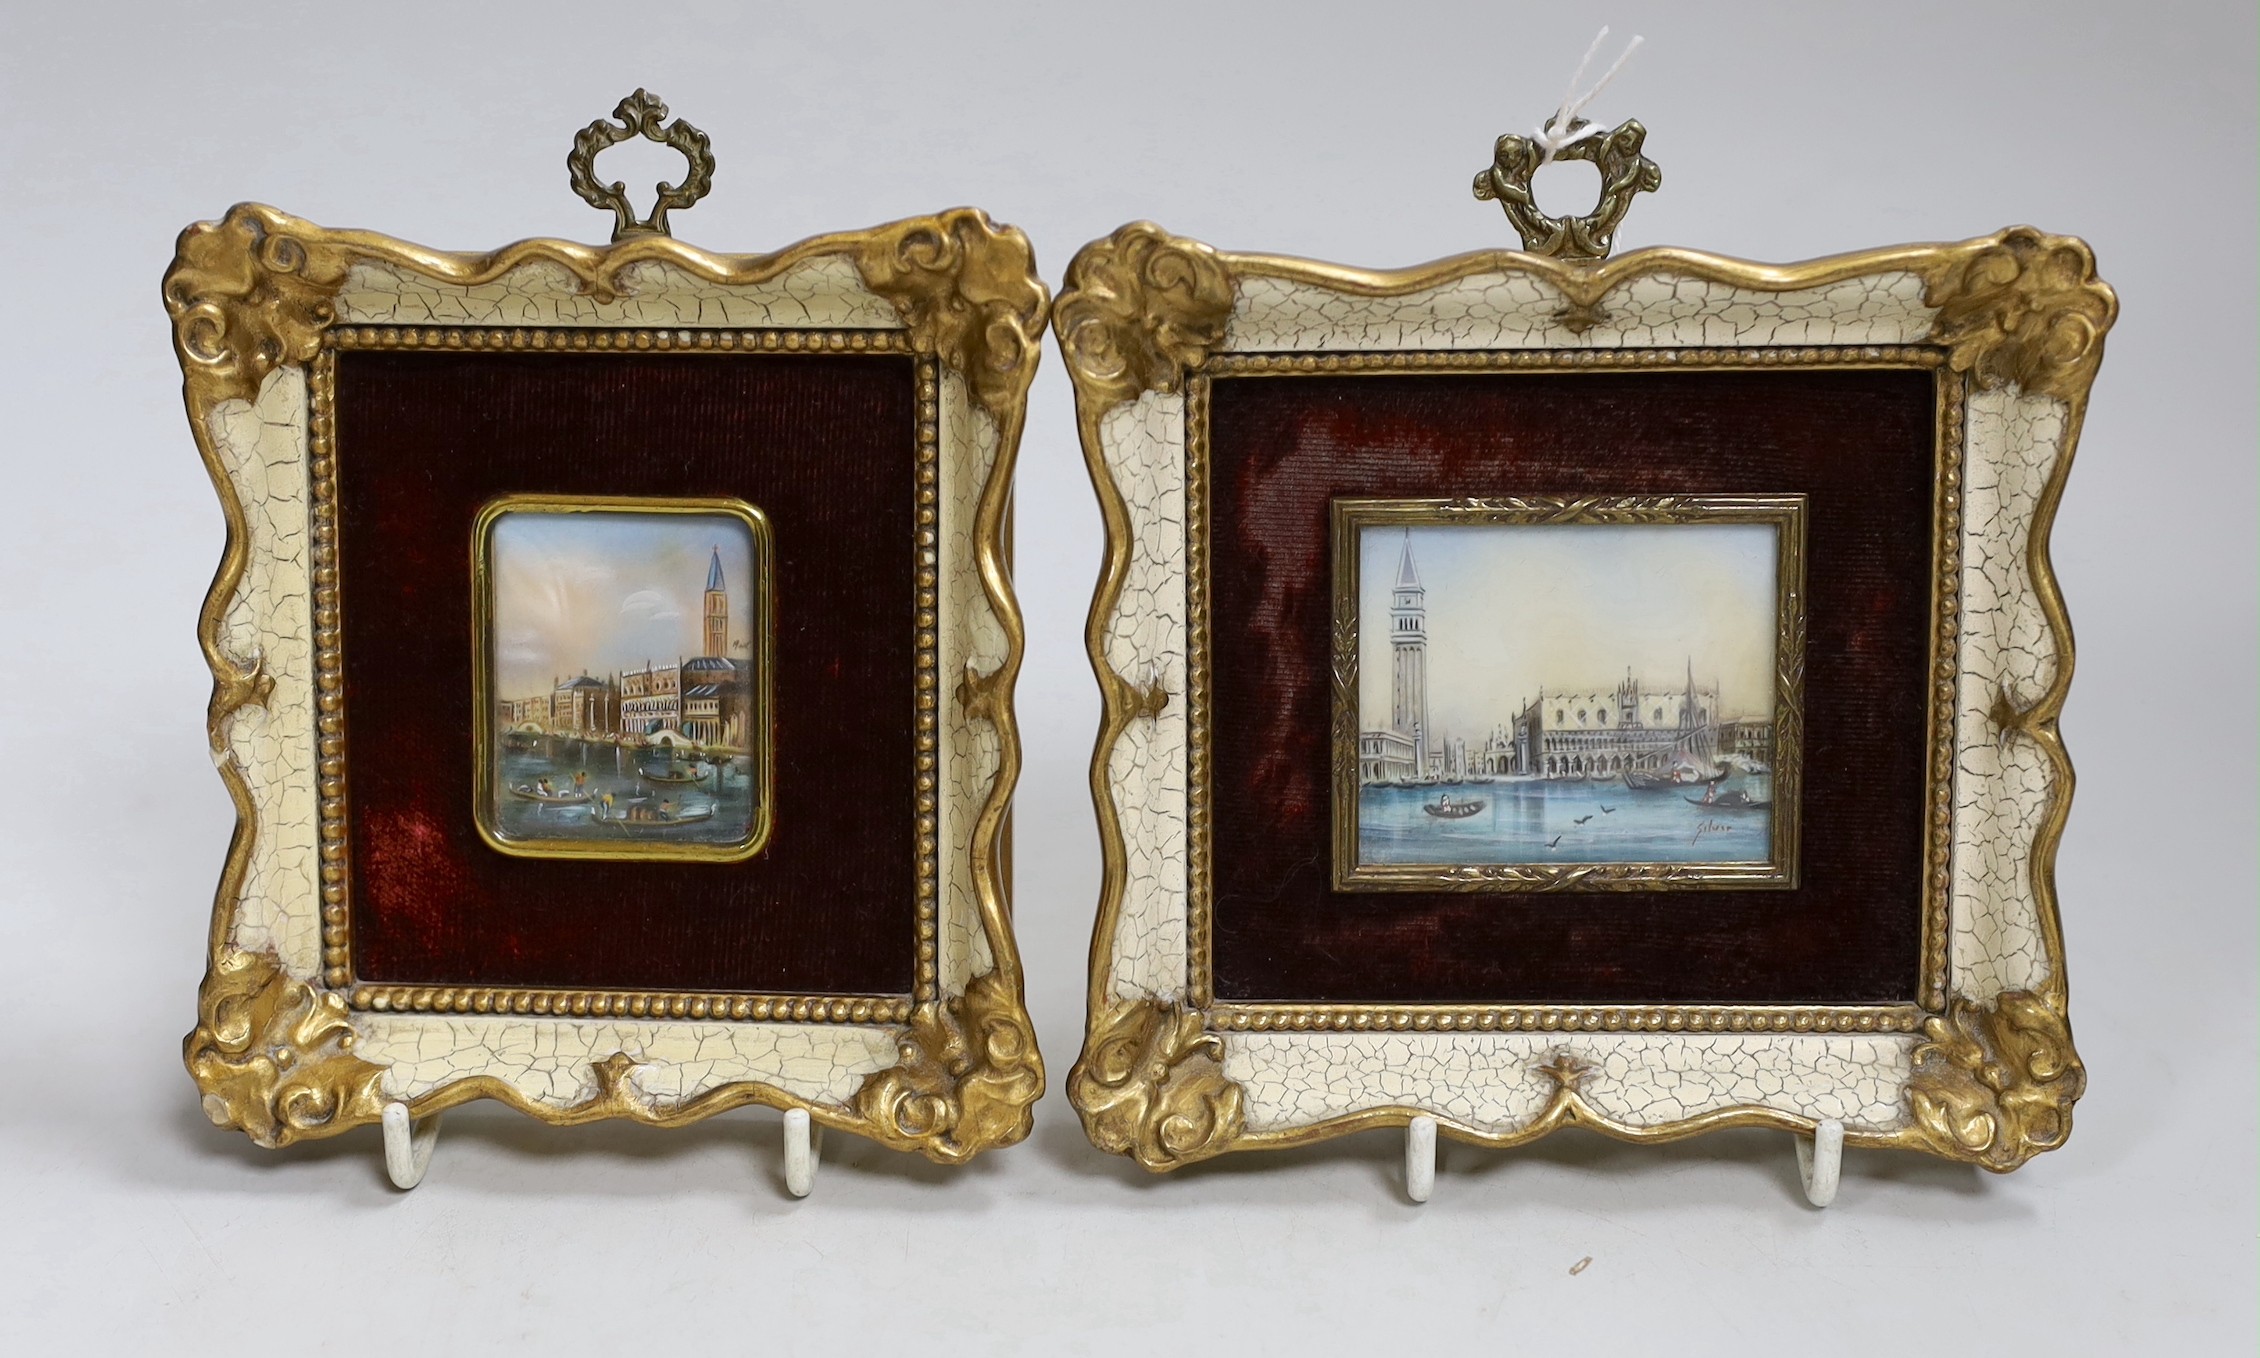 Two framed gouache on card, Venetian canal scenes, one signed. Largest 5x6cm excl frame